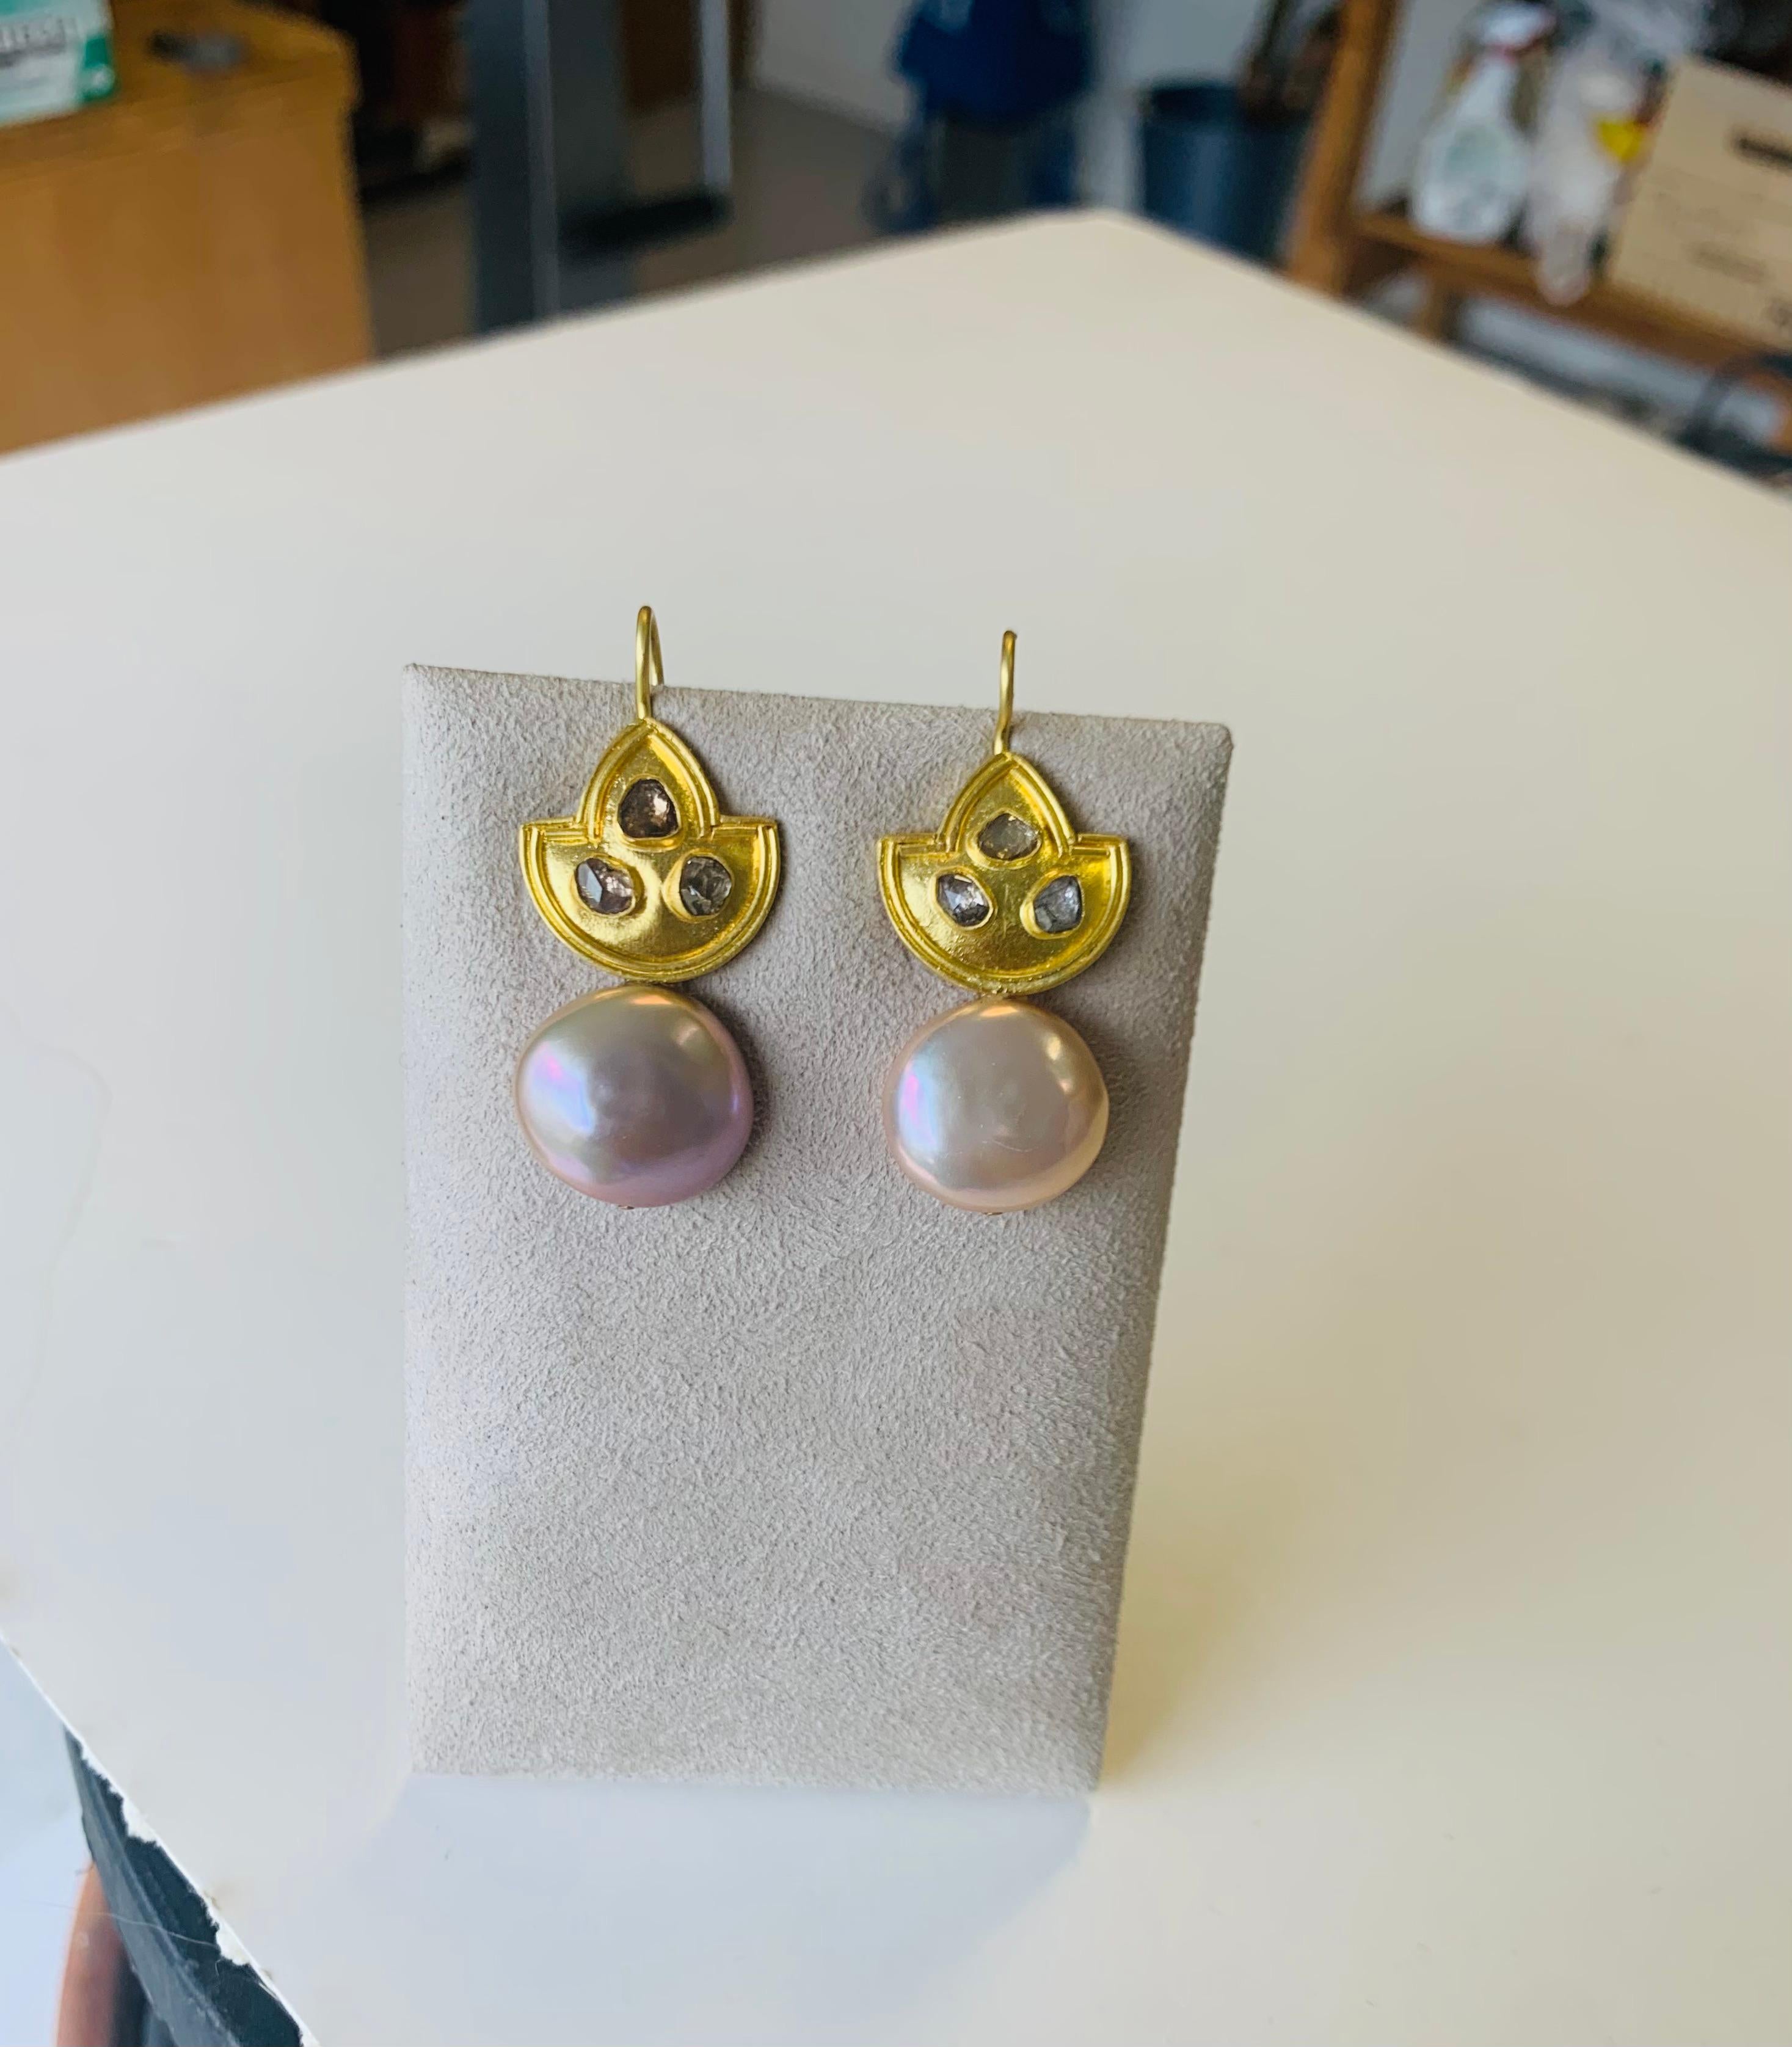 Lotus earrings in 22 Karat gold with champagne antique rose cut Diamonds and blush button Pearls
These earrings were inspired by my many visits to the Bronx Botanical gardens and their beautiful waterlily displays.
They are entirely hand crafted in